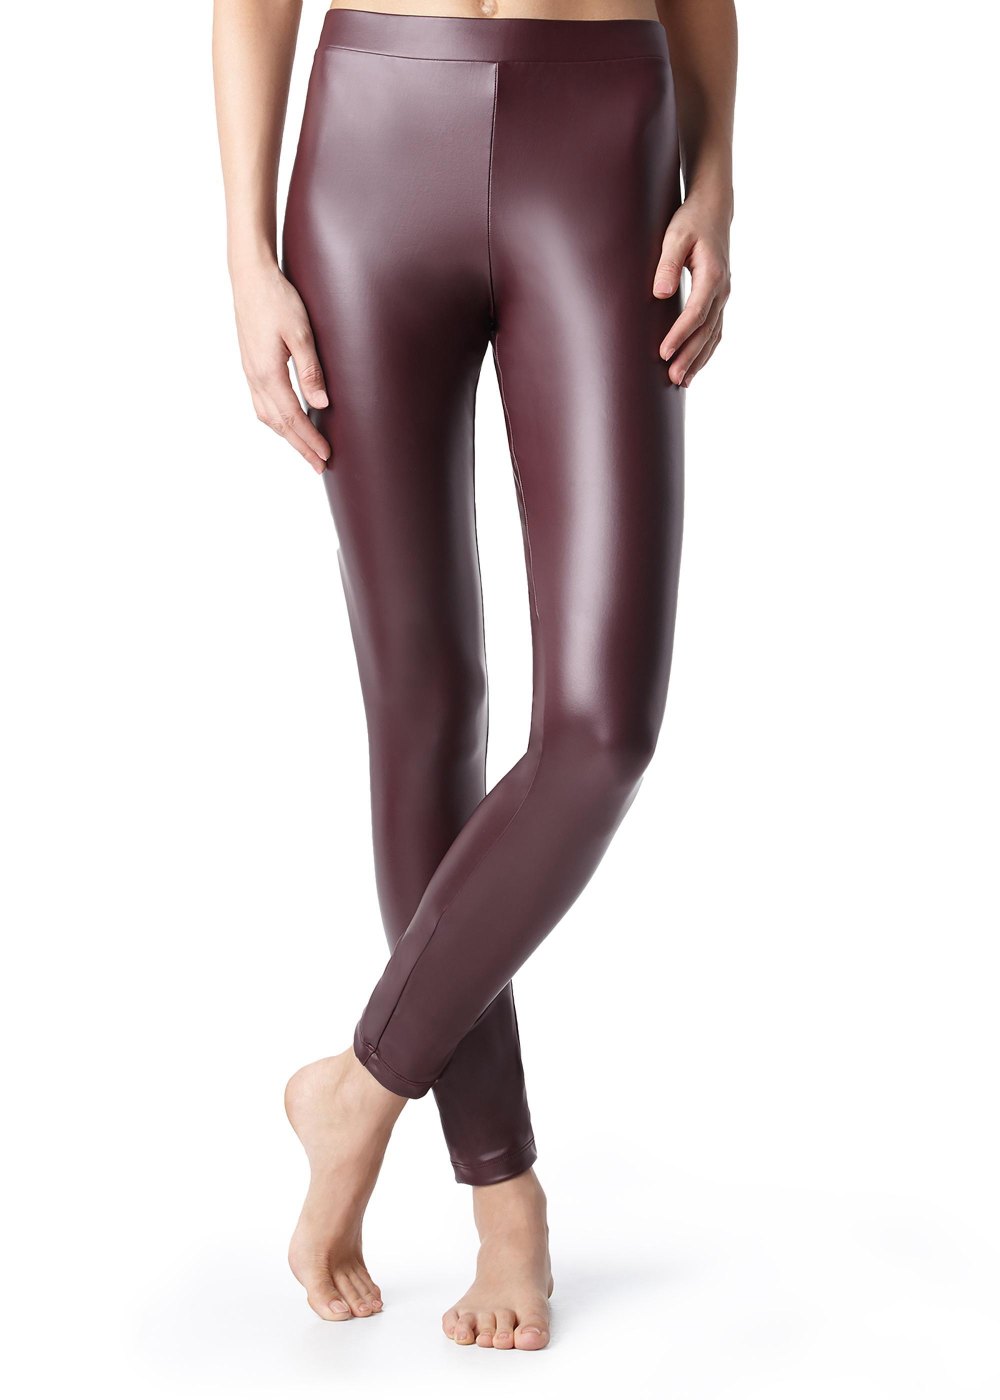 calzedonia leggings sale buy two get one free